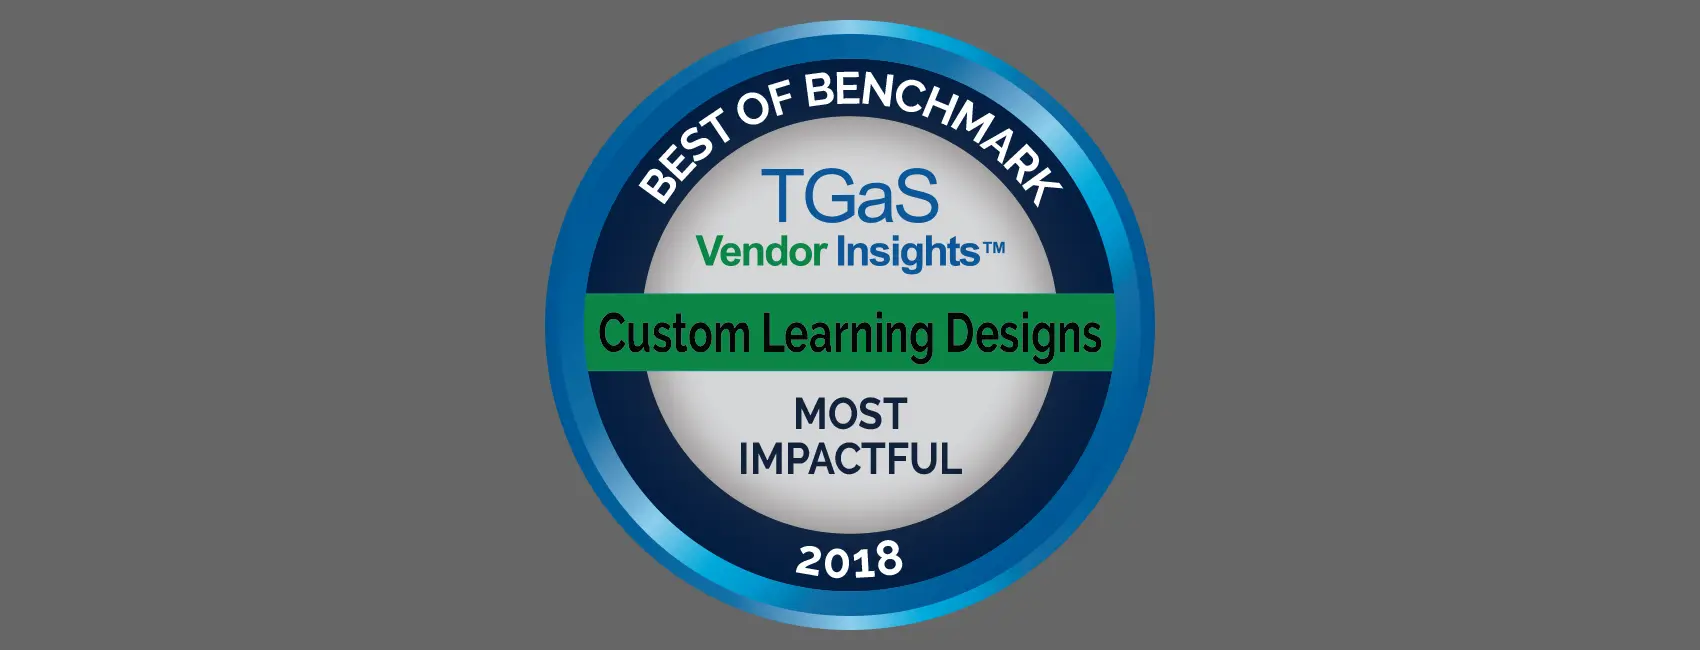 CLD Named Most Impactful Vendor 2018 by TGaS Advisors